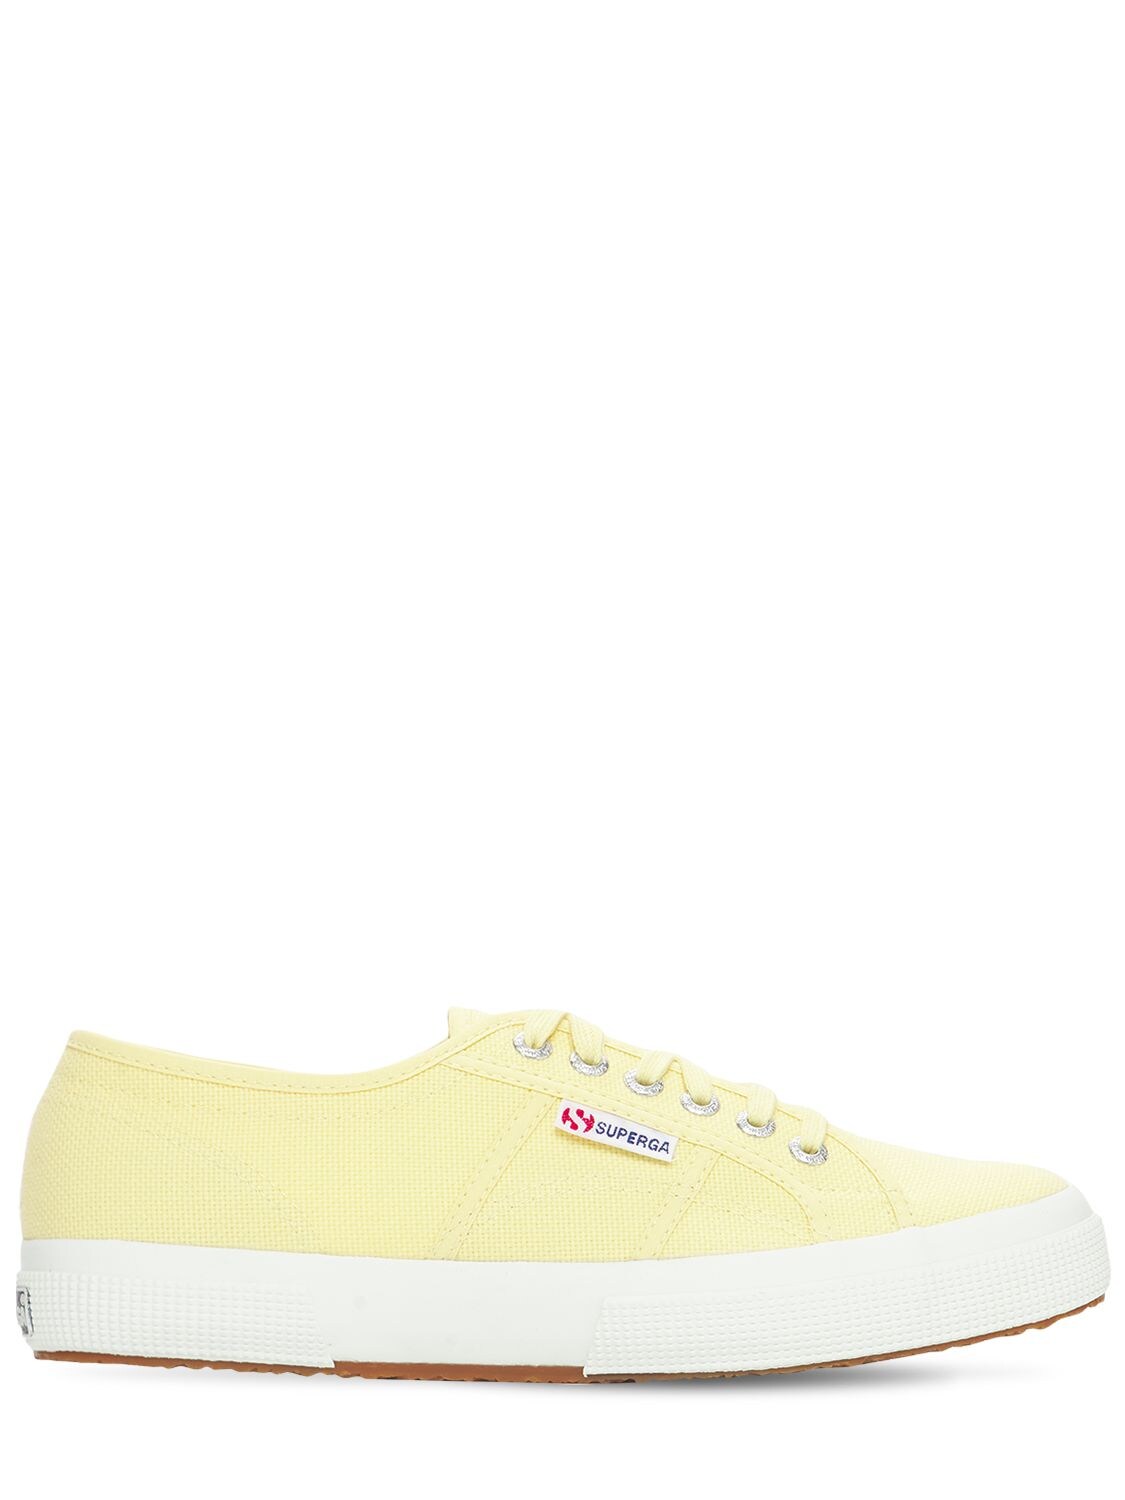 Superga Logo Canvas Sneakers In Yellow